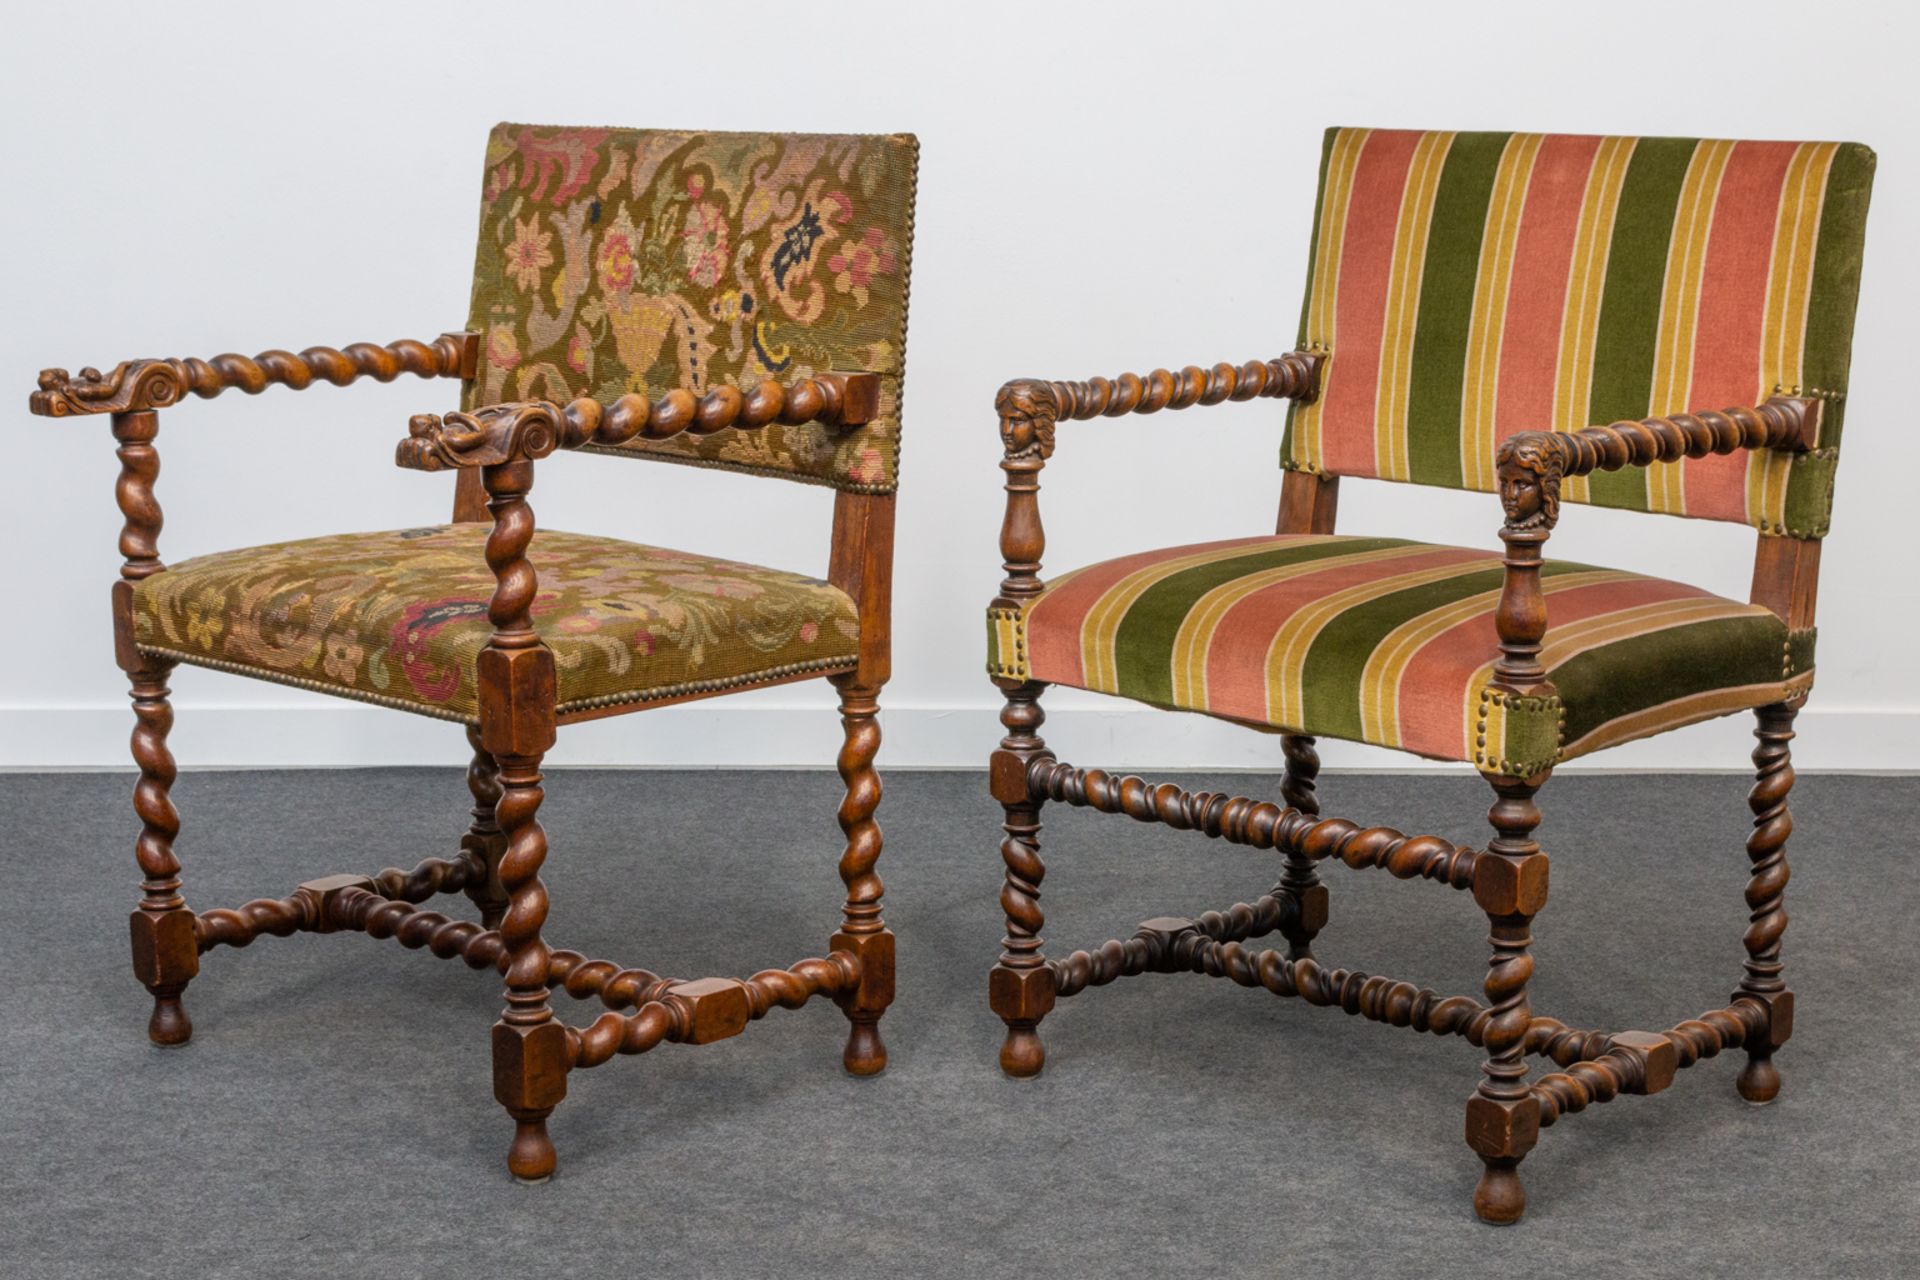 A collection of 2 castle chairs with sculptured handles. 19th century. (92 x 63 x 54 cm) - Bild 7 aus 18